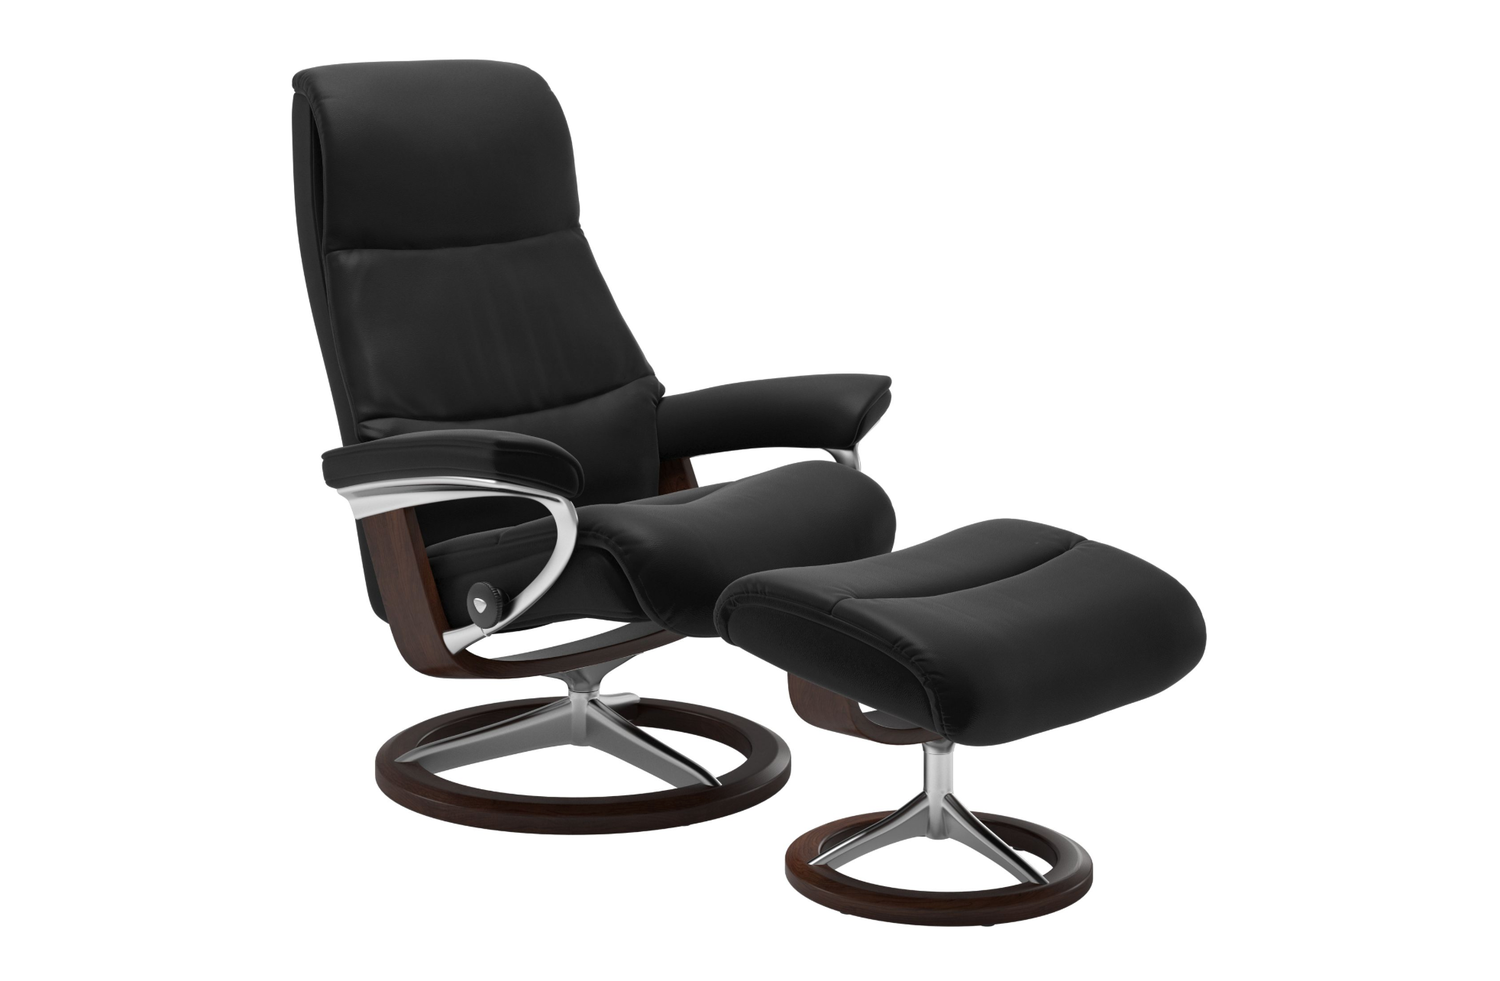 View – SL Recliners Stressless